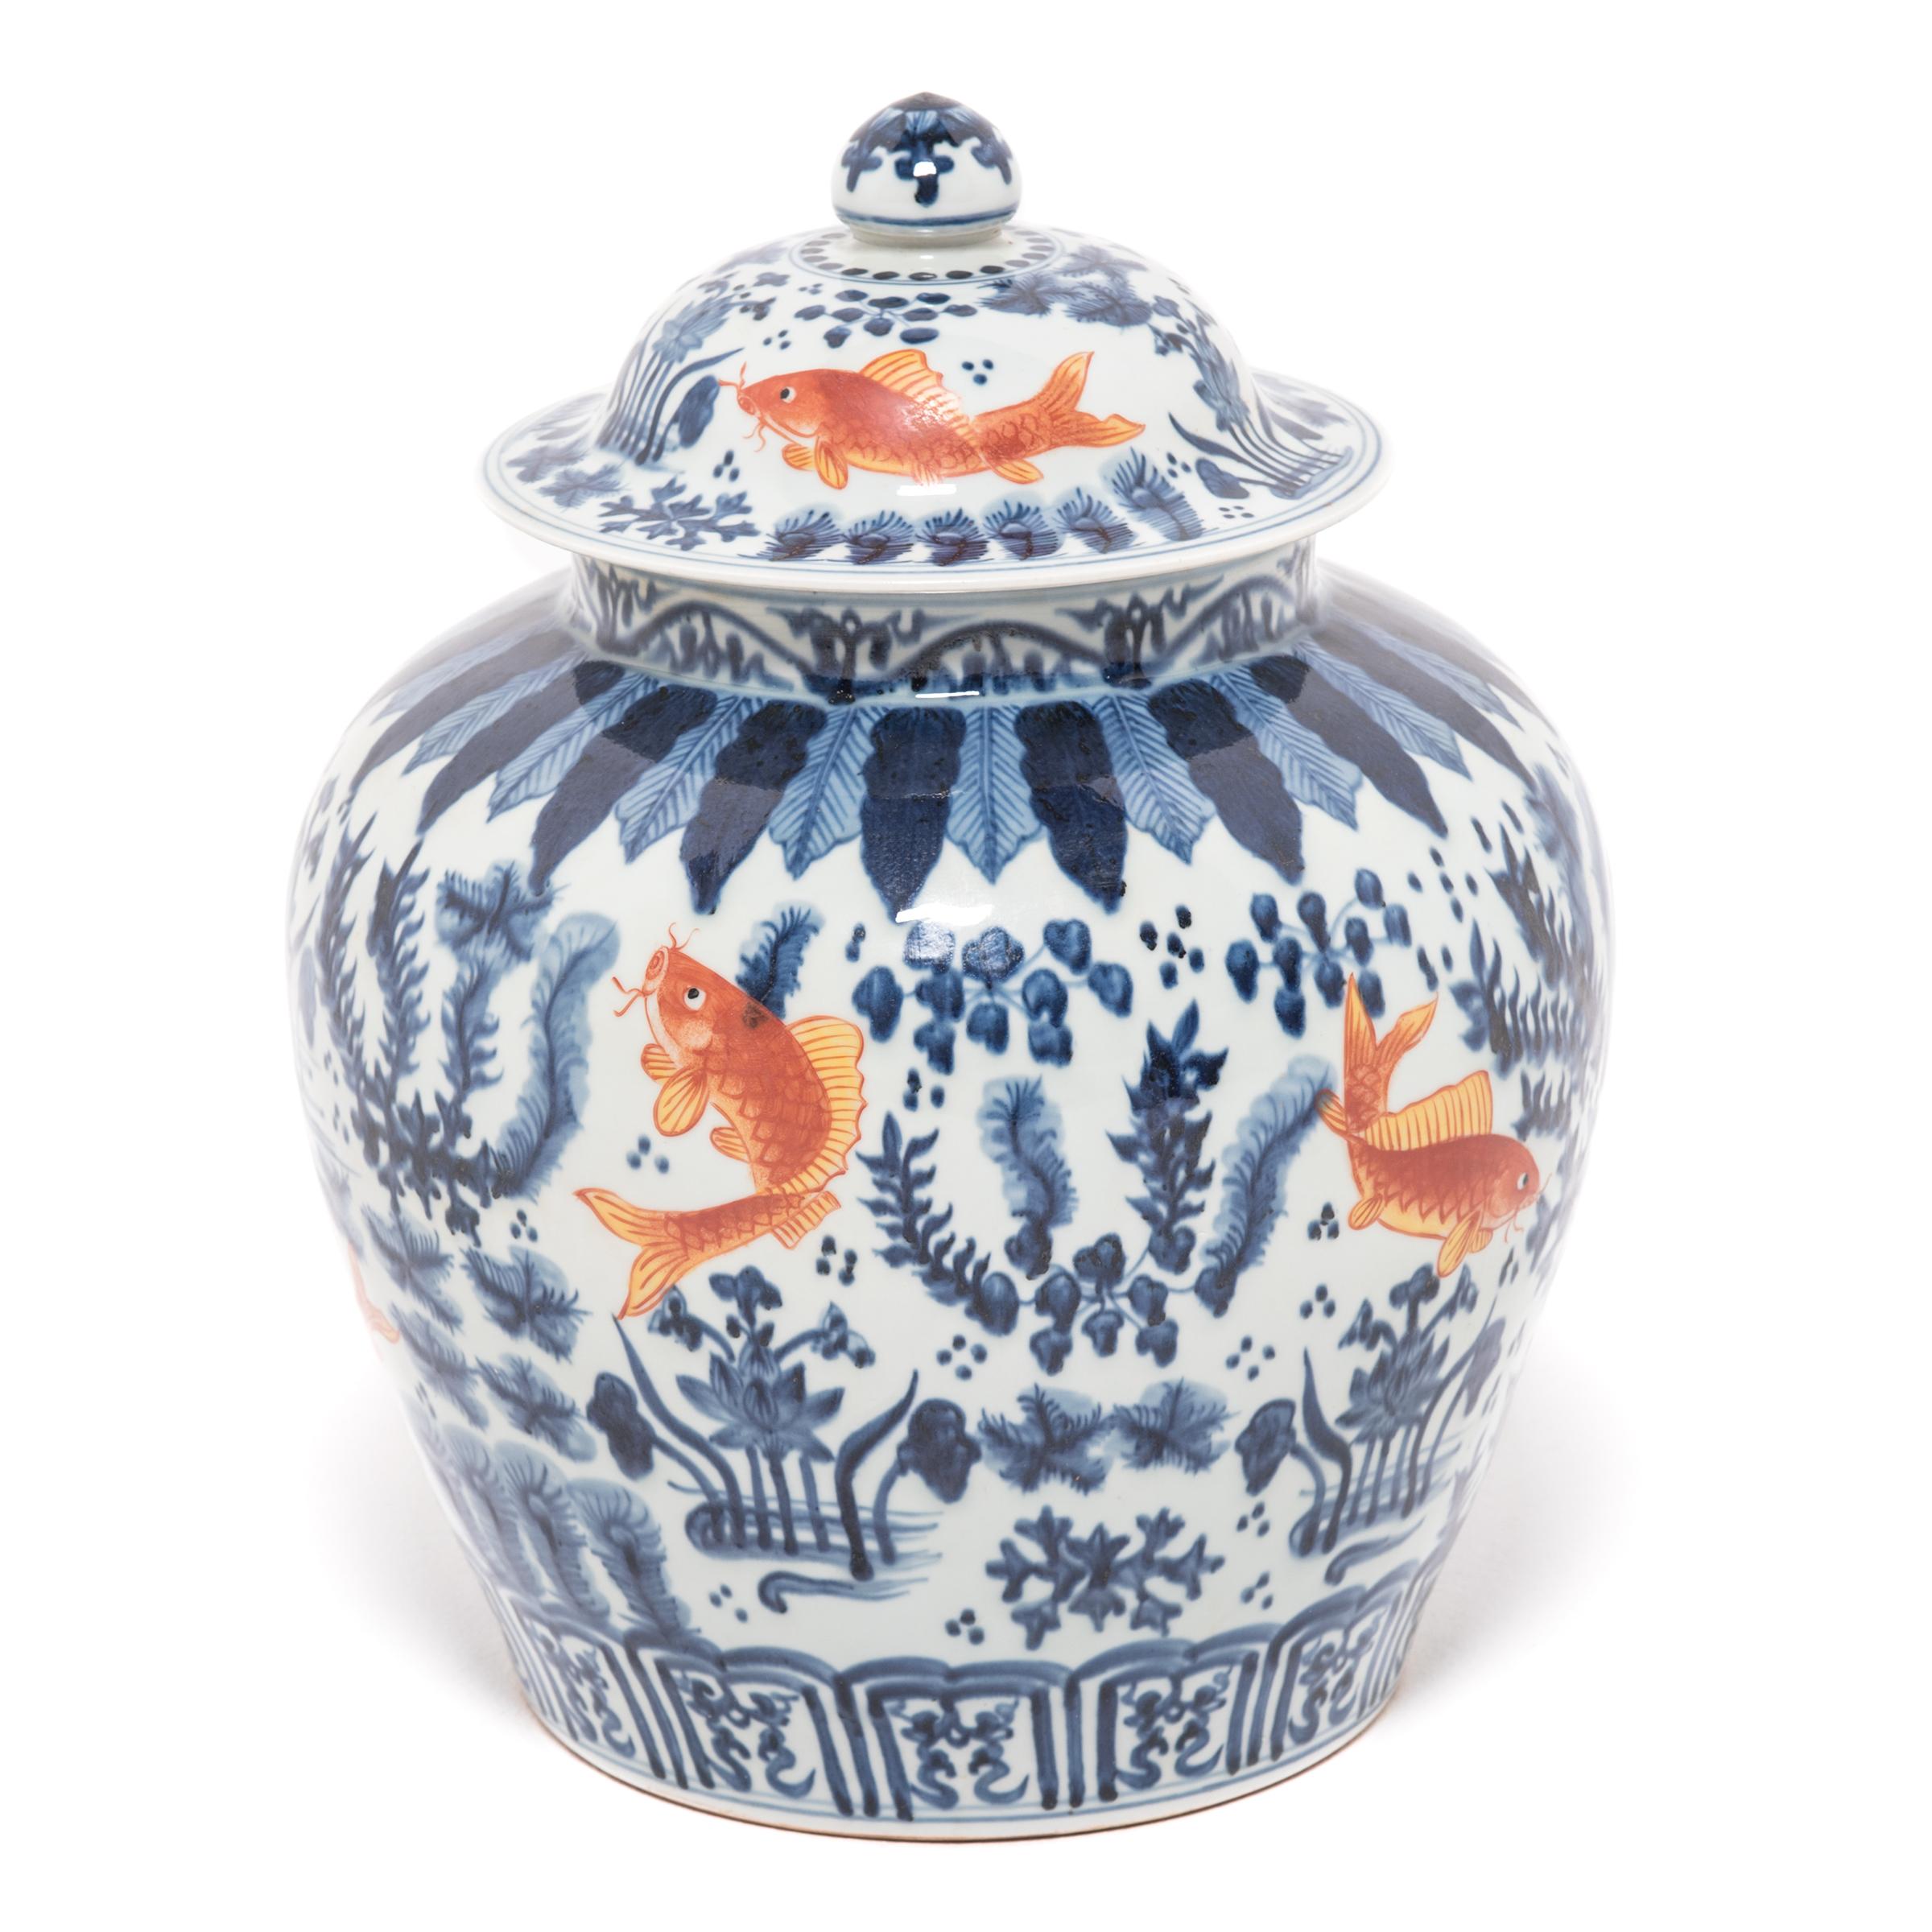 Revered for centuries for its elegant designs of rich cobalt blue and pure white, traditional Chinese blue-and-white porcelain lives on in this covered jar hand painted with fish and flora of the sea, traditional symbols of prosperity and harmony.